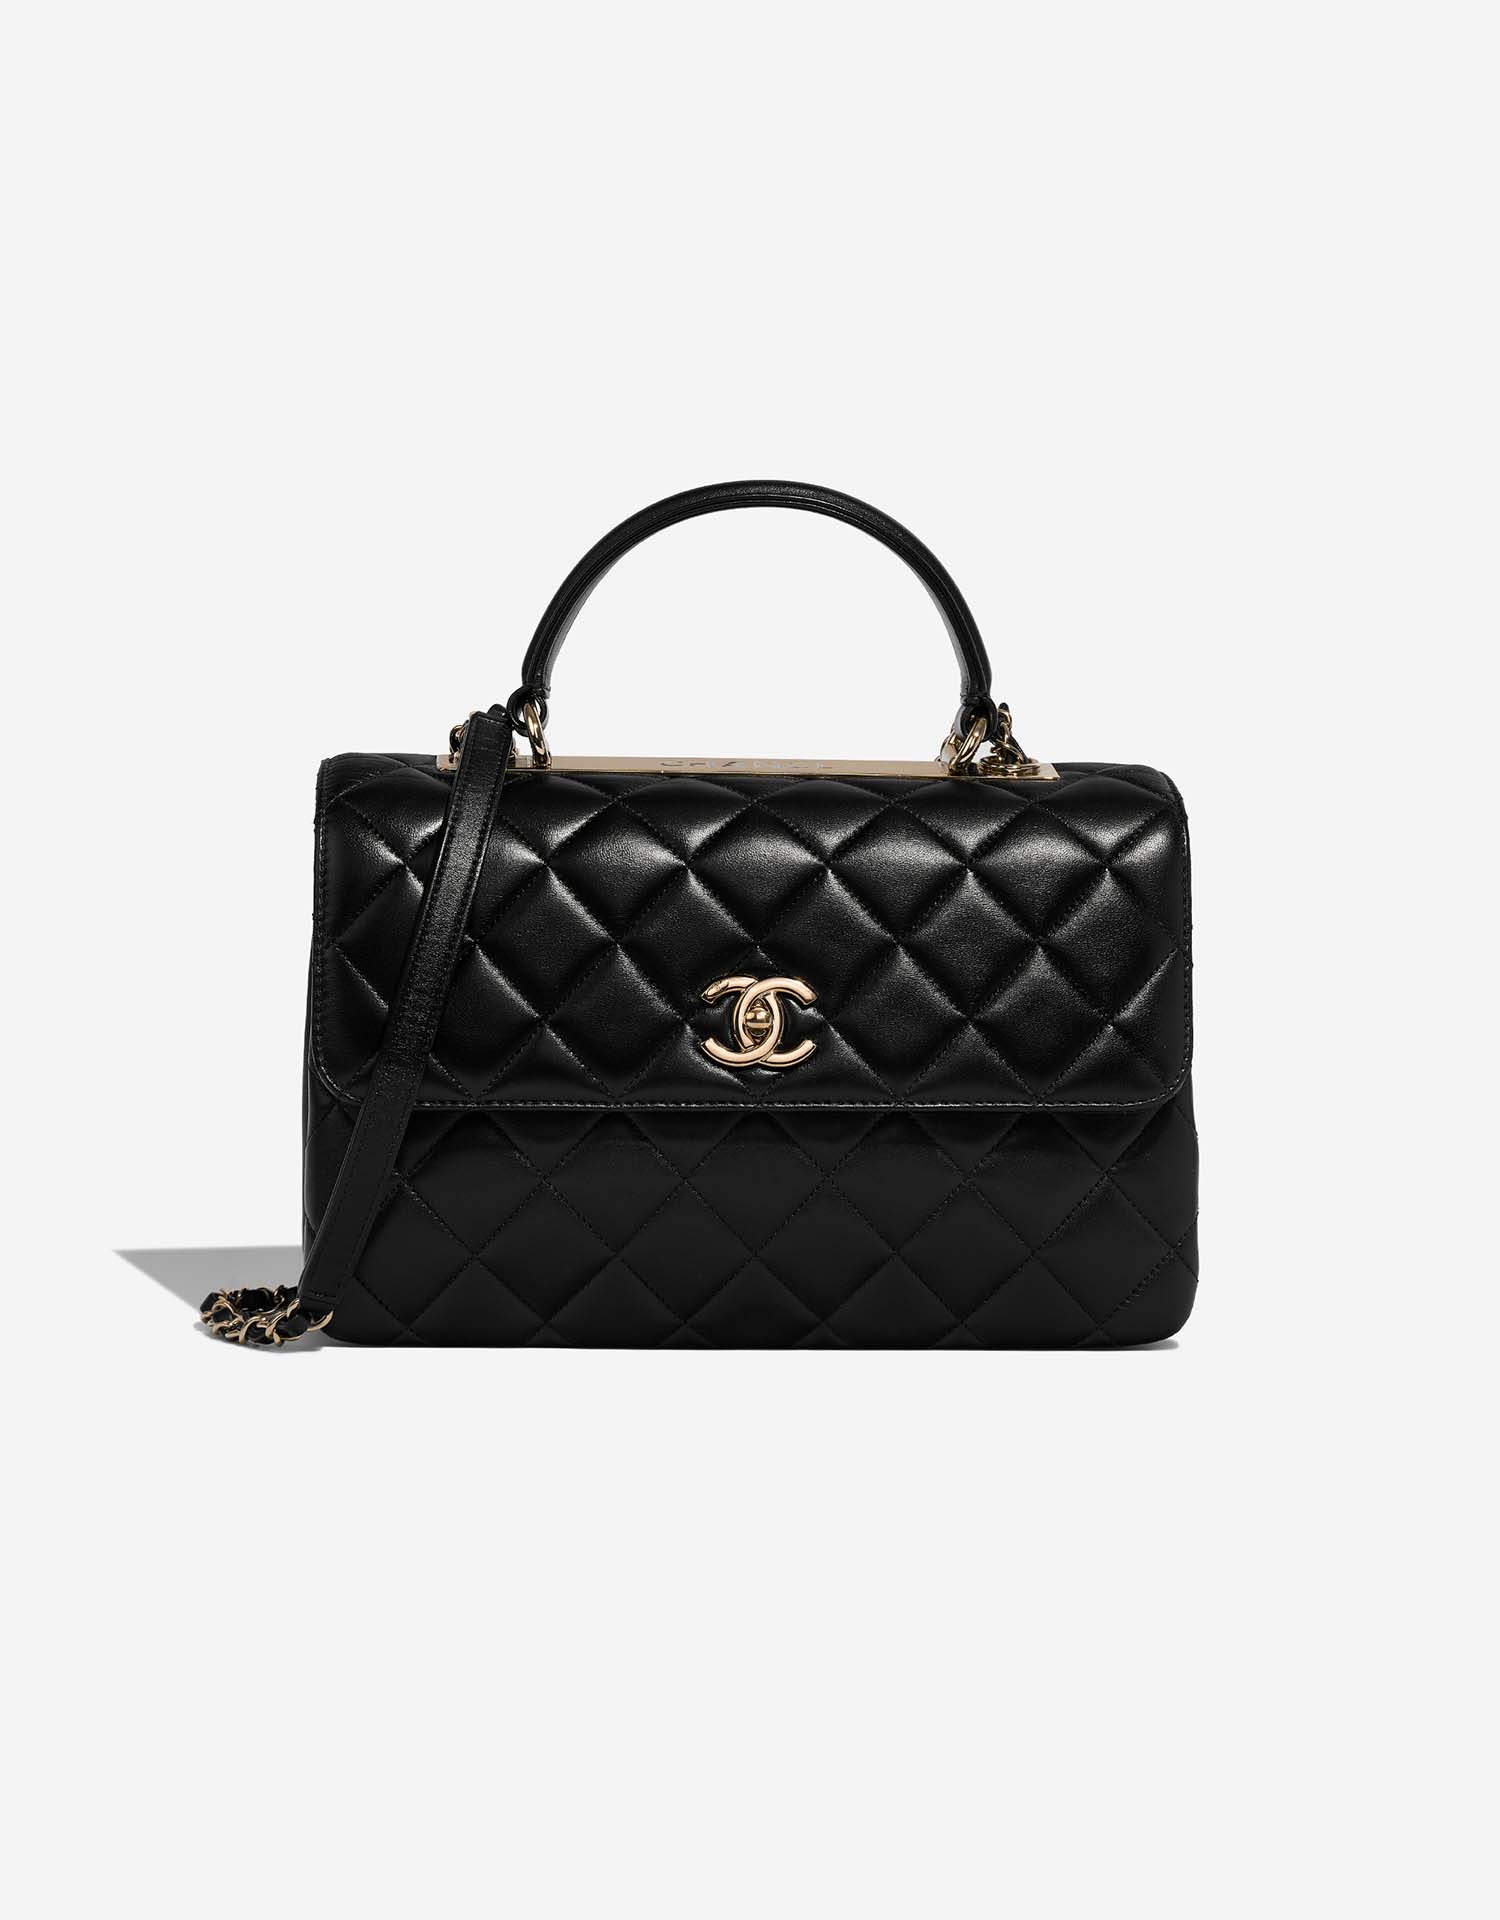 Chanel Trendy CC Bag Review, Helpful Tips